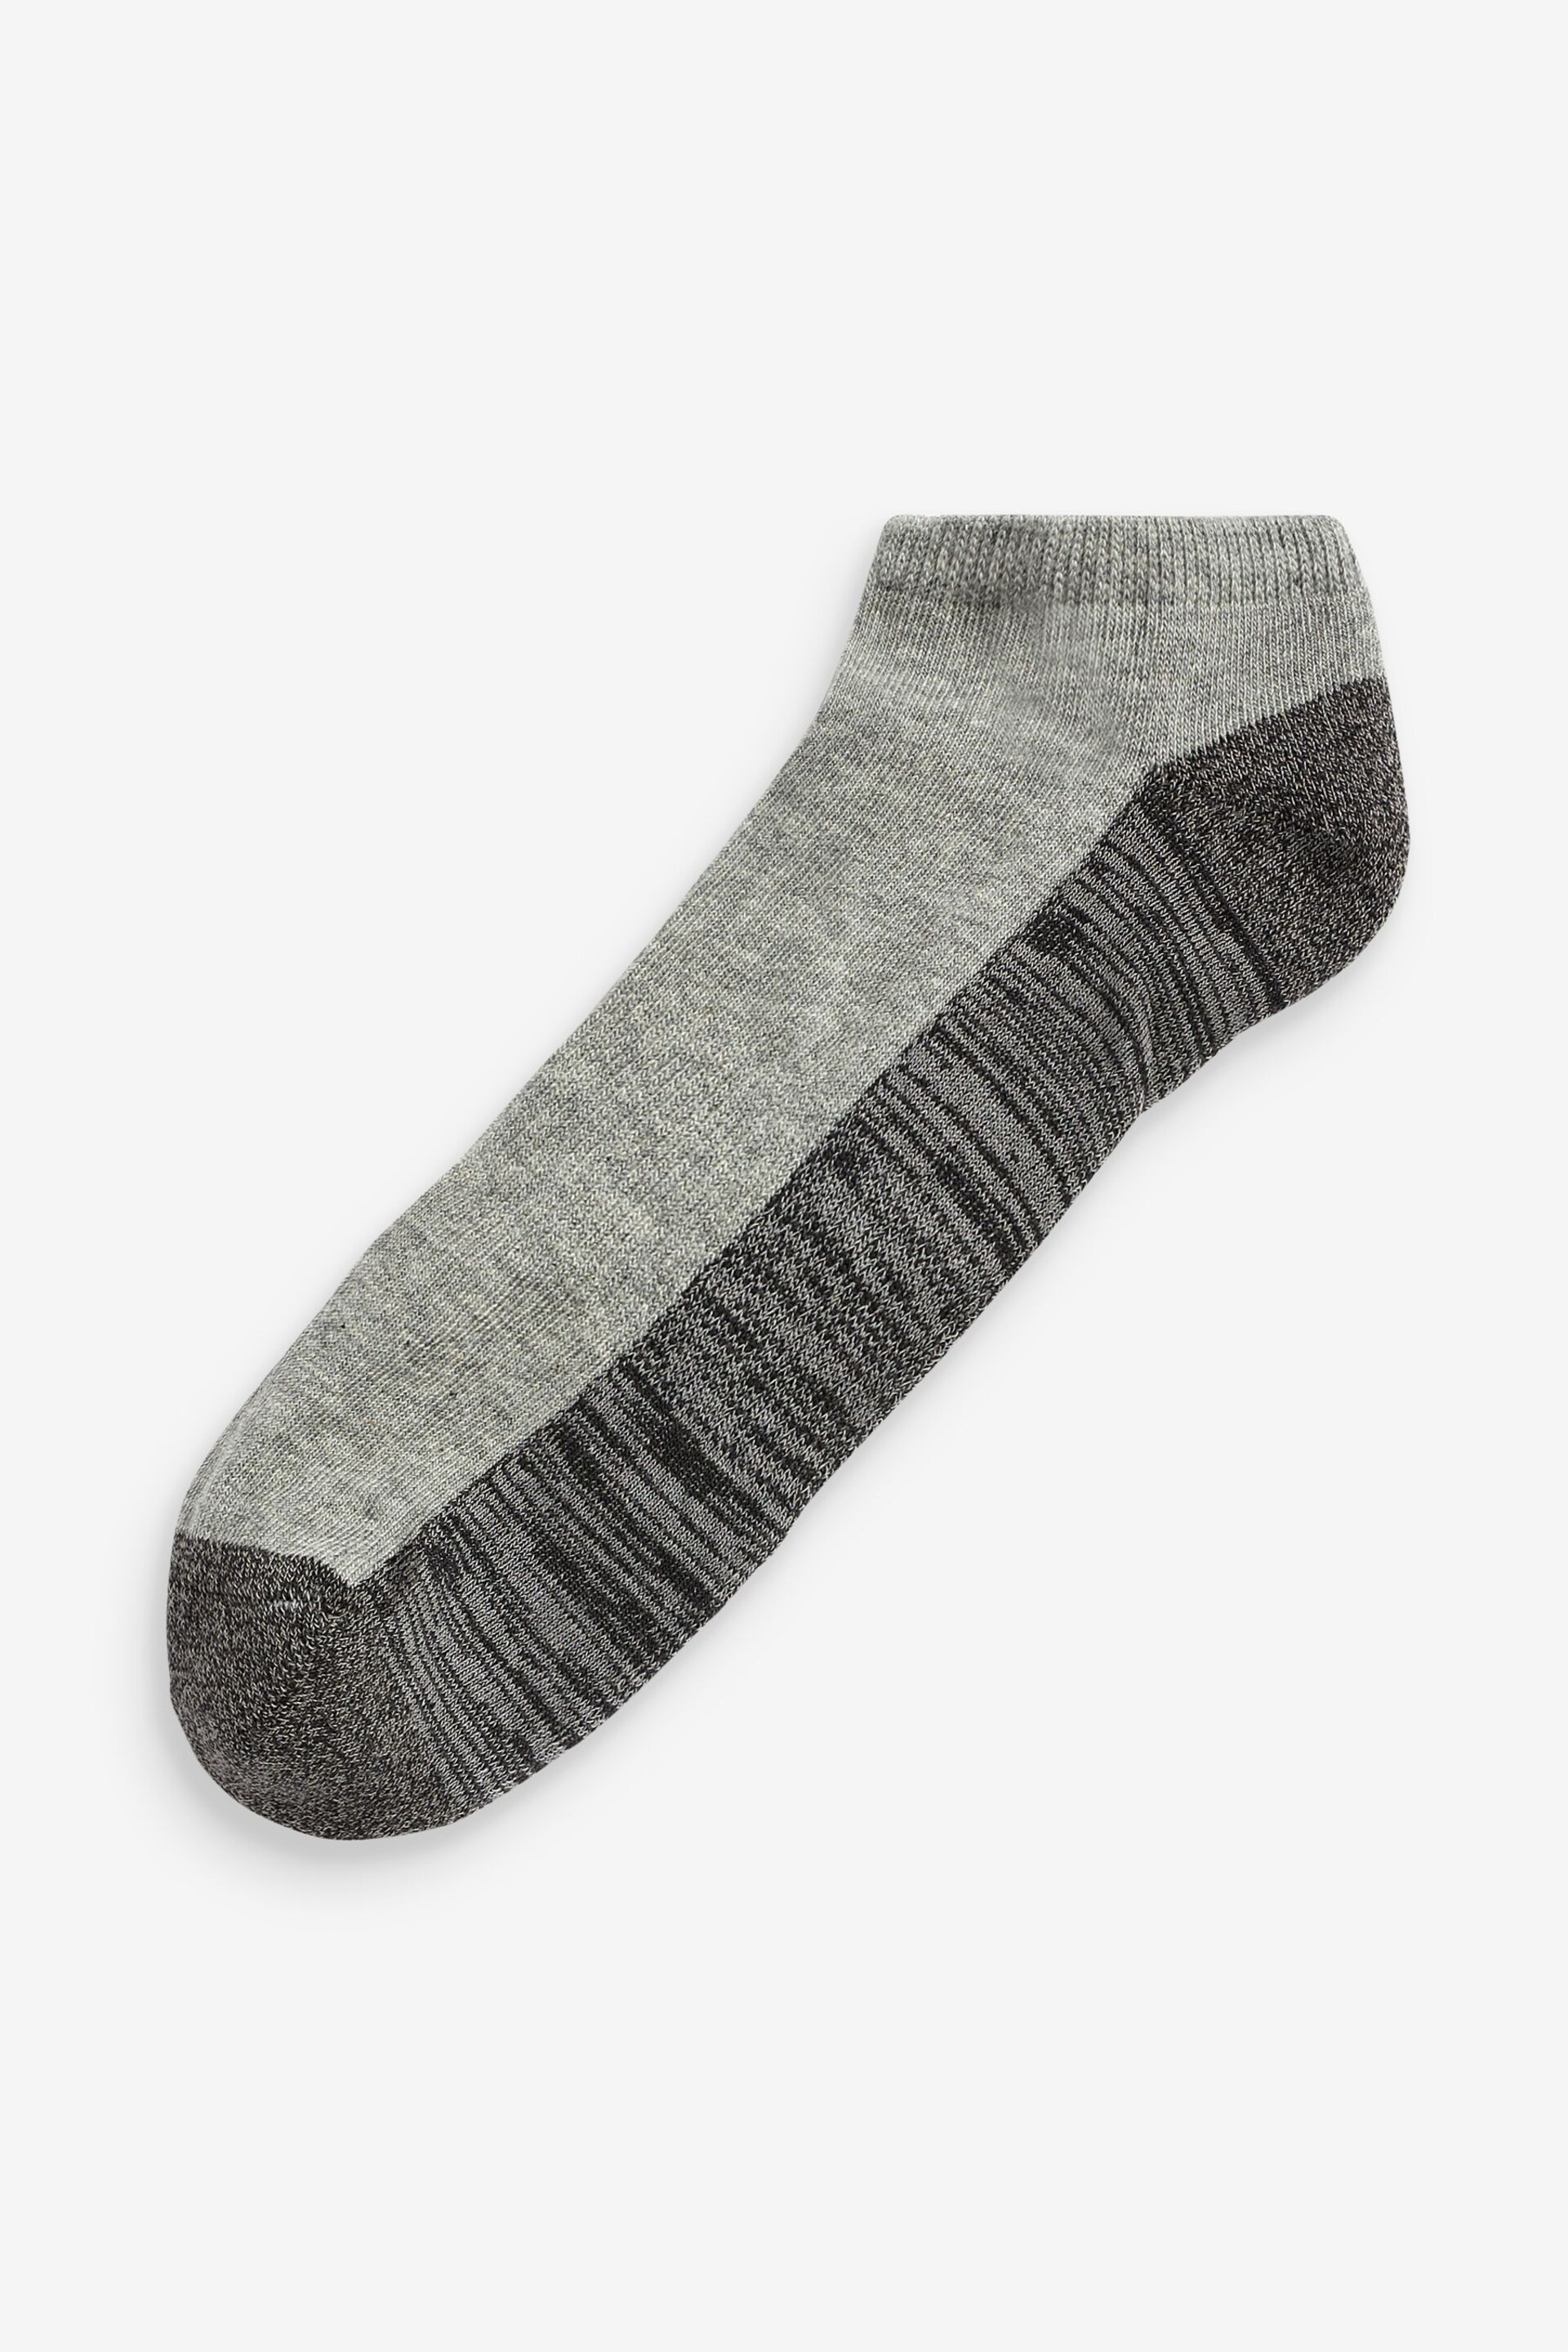 Blue/Grey 5 Pack Cushioned Trainers Socks - Image 6 of 6